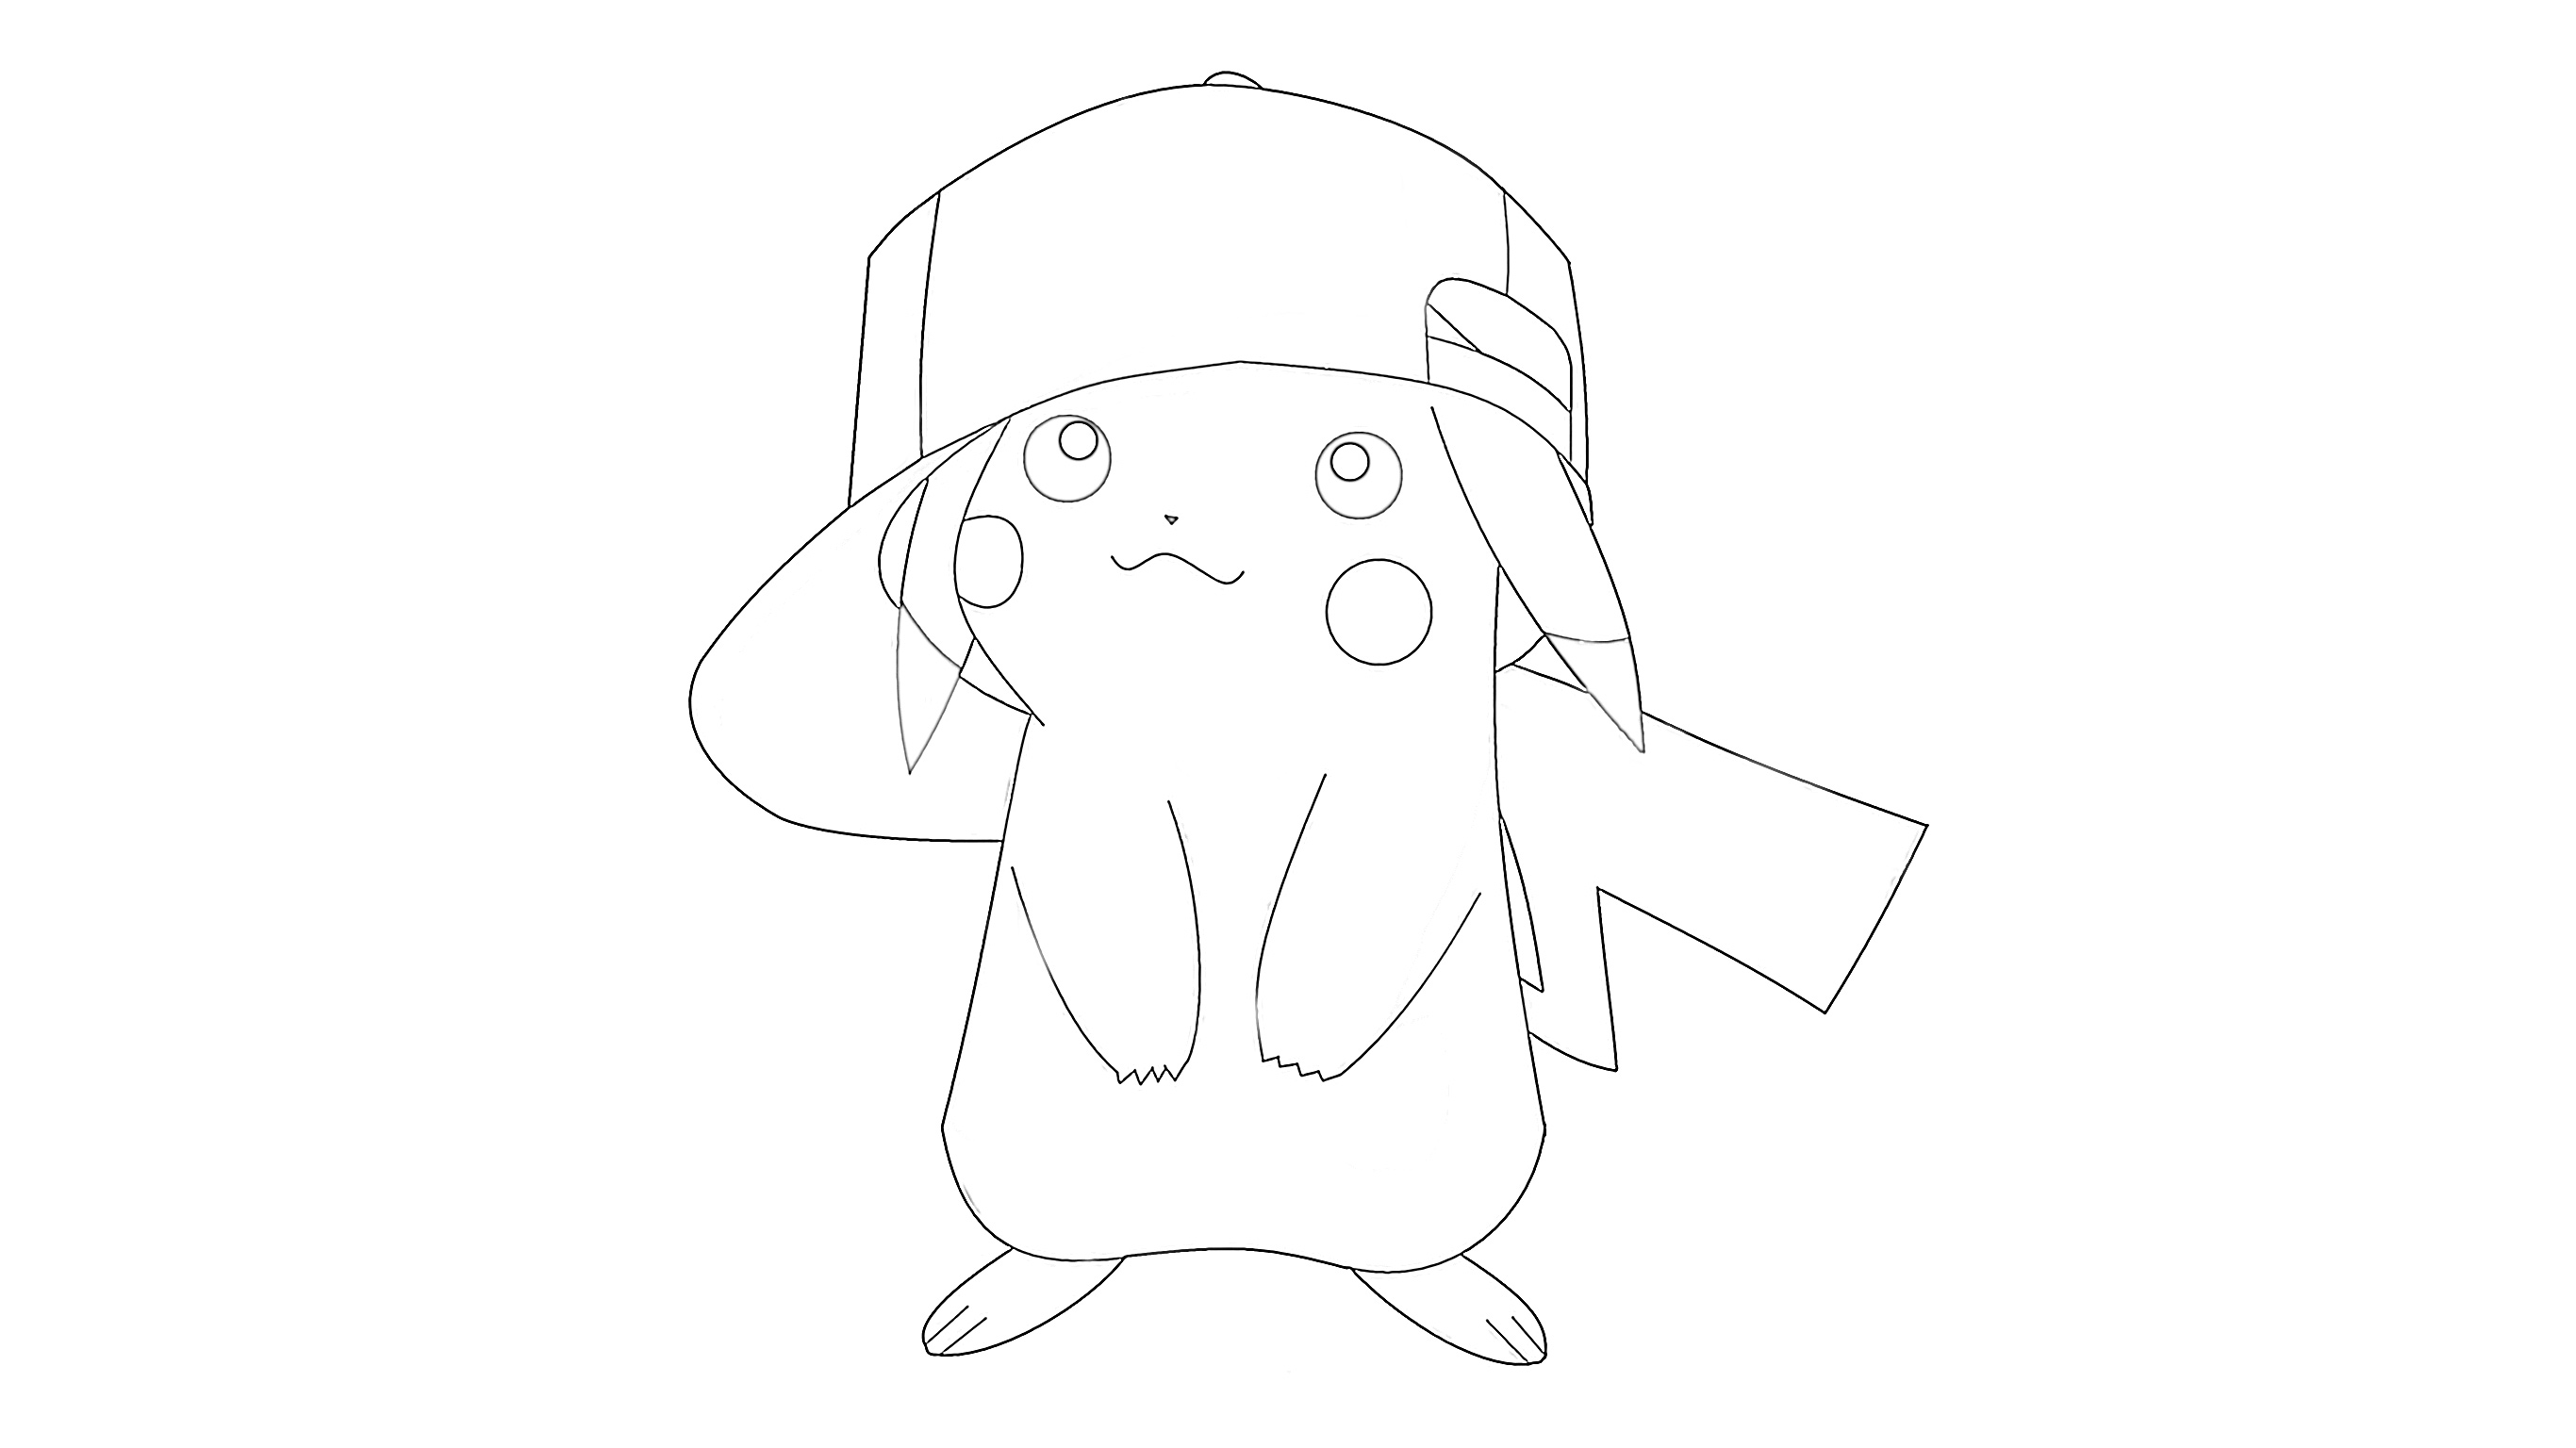 Pikachu wearing a hat coloring page